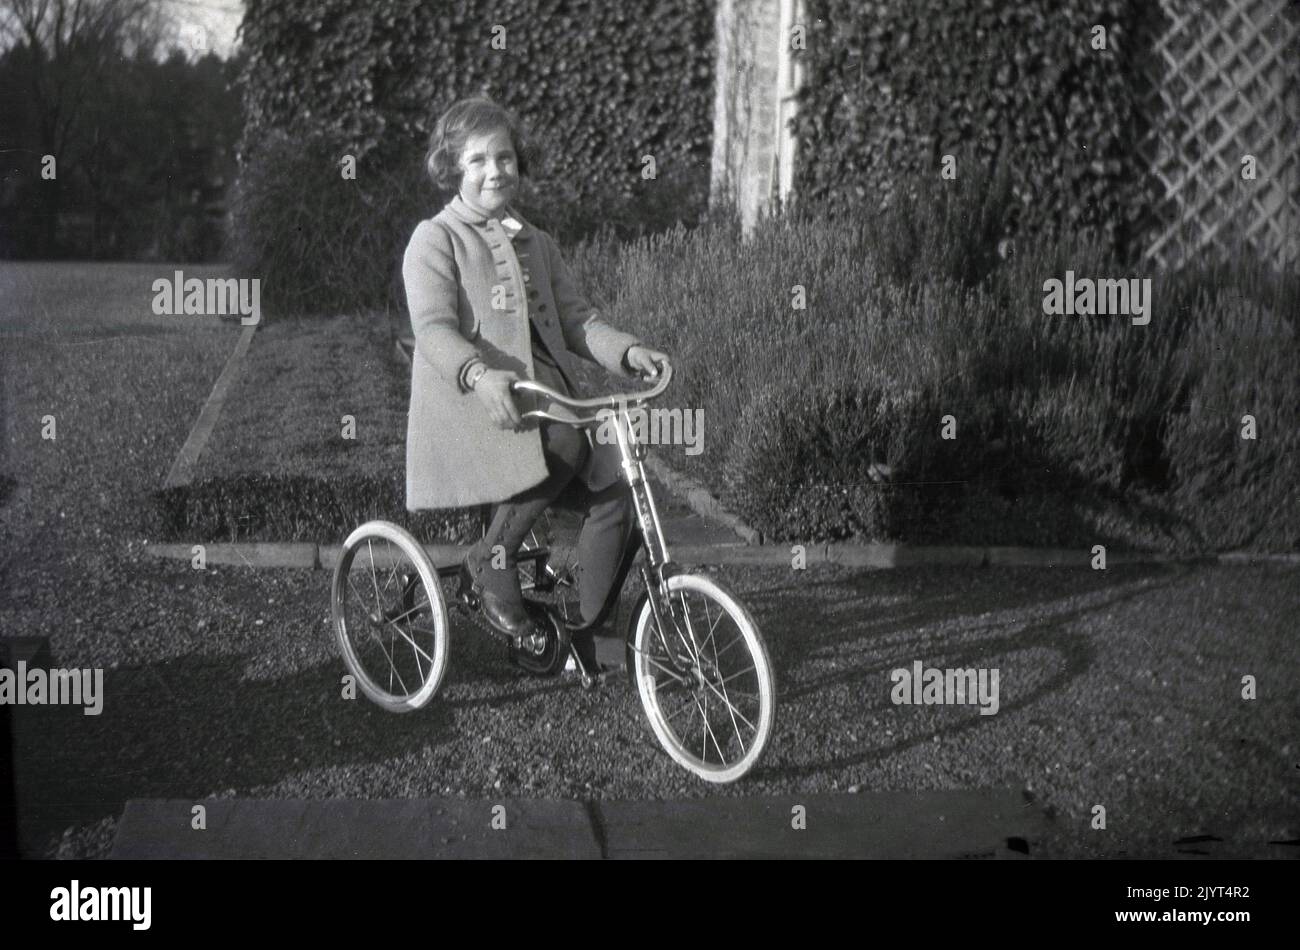 1934, historical, outside a country house on a gravel path, a young girl in a stylist coat and boots, sitting on a tricycle - possibly a Tri-ang model made by the British company, Lines Bros- England, UK. Children's tricycles with a pedal and chain and equal size wheels - like the one seen here - began to become popular in the 1910s and WW1 saw major improvements to chain-driven design, created by the demand for invalid carriages for the injured soldiers. Stock Photo